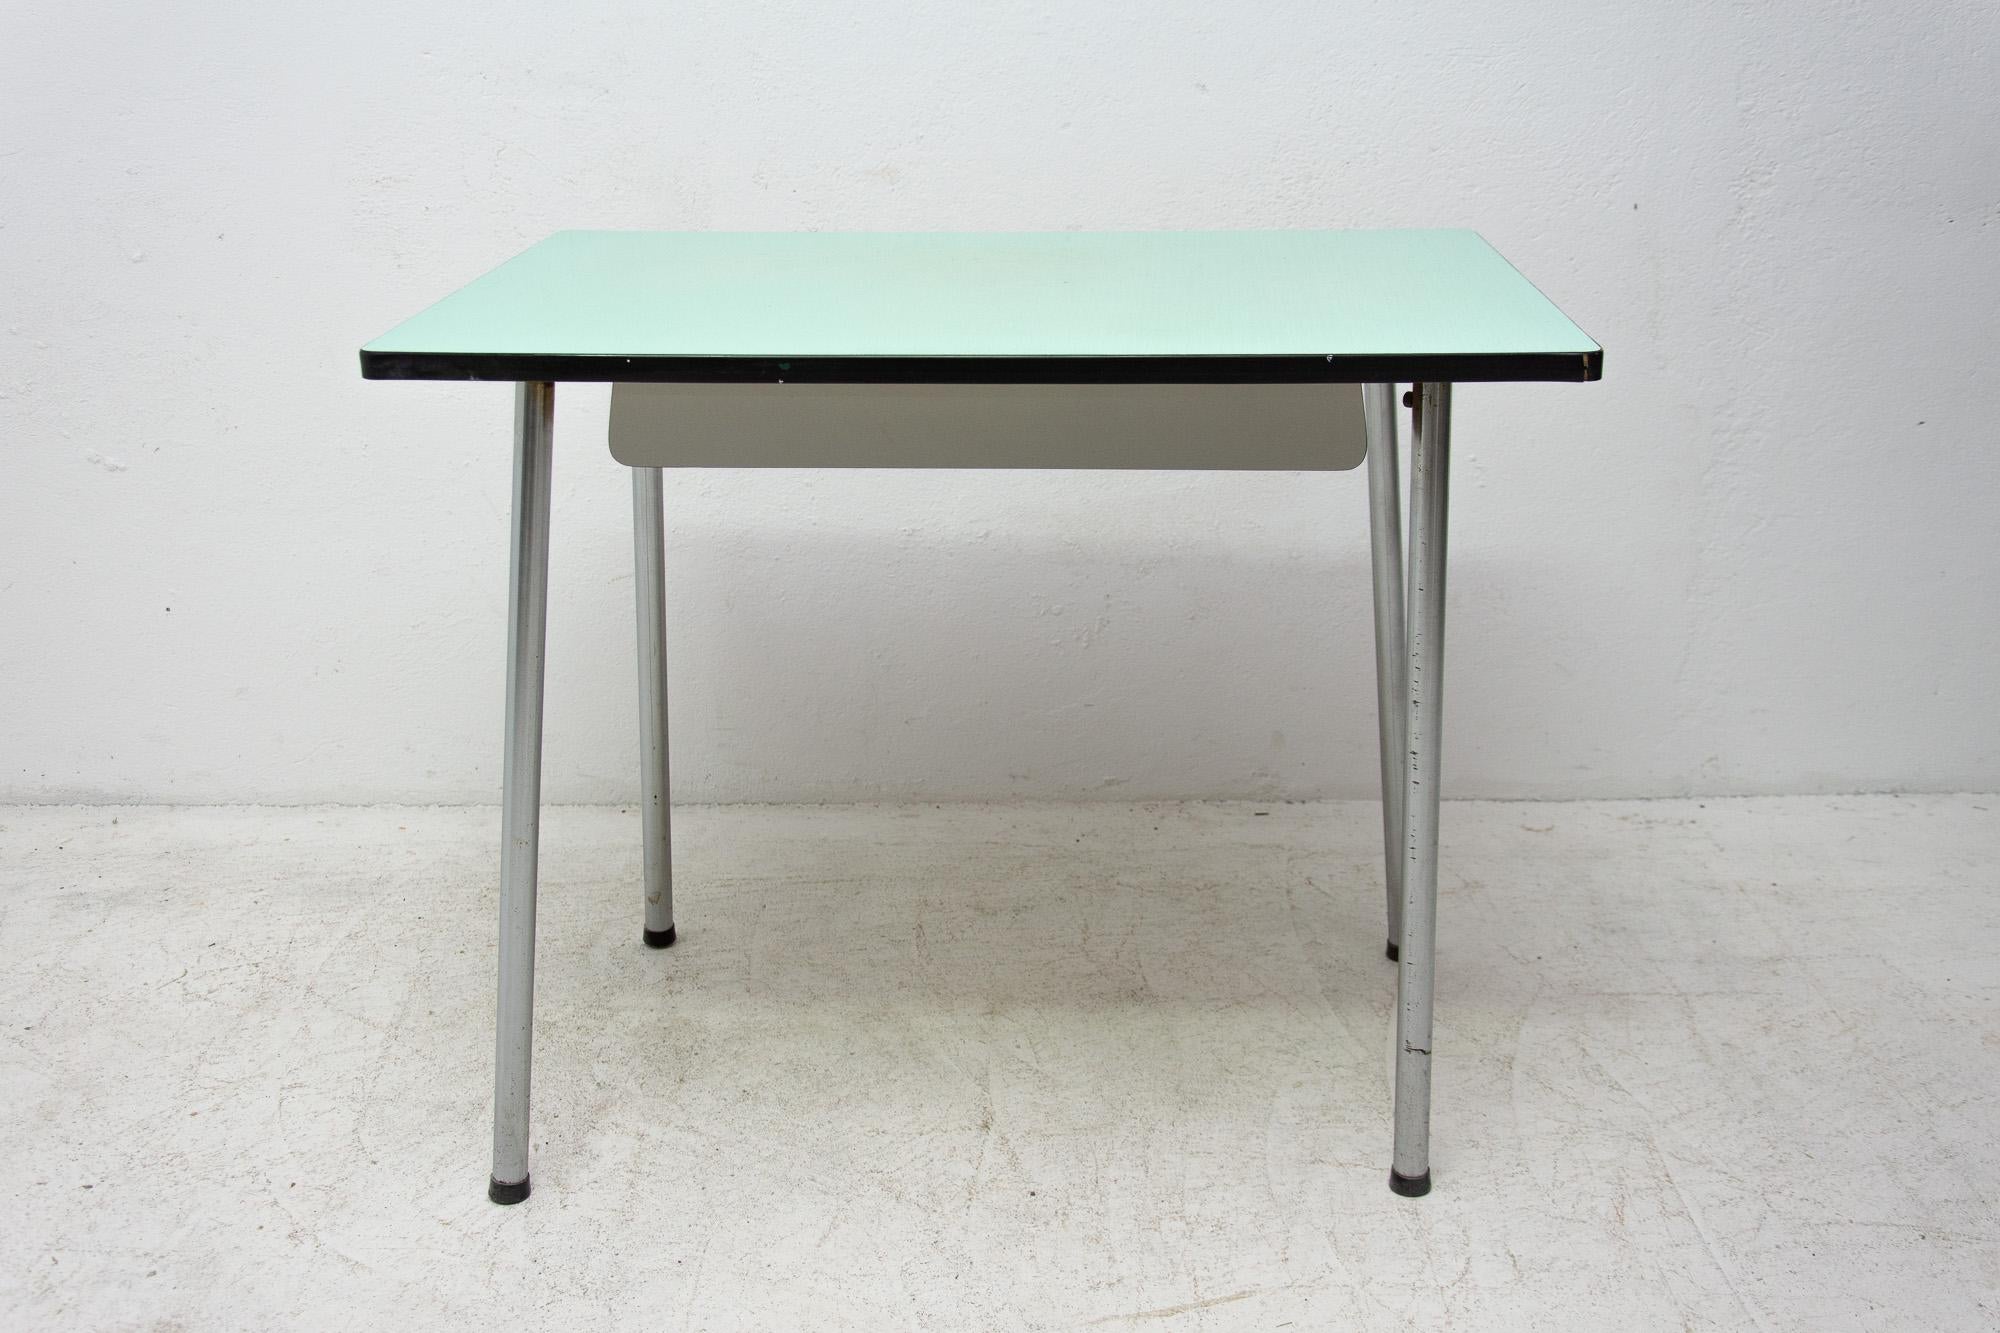 Midcentury writing desk or side table, it features a Formica surface and chromed legs and one-drawer. It was made in Czechoslovakia in the 1960s.

The tabletop is lined with a black plastic strip, there is damage to this strip in several